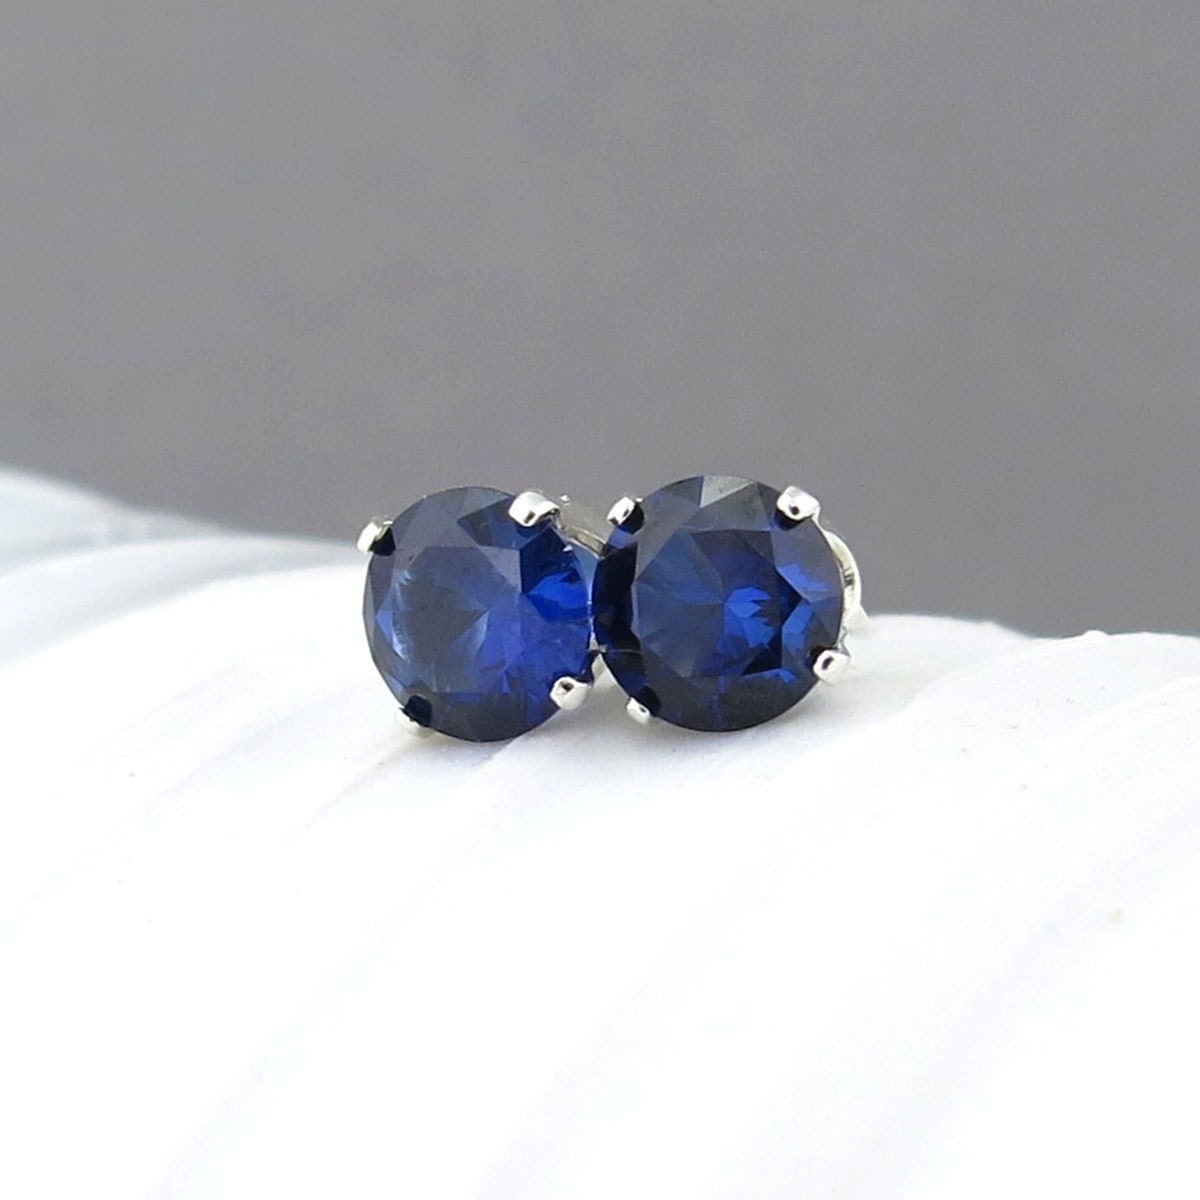 Blue Sapphire Studs Earring,Gemstone Textured Earring,Tiny Studs Earring,September Birthstone Jewelry,Handmade Earring,Delicate,Gifts for